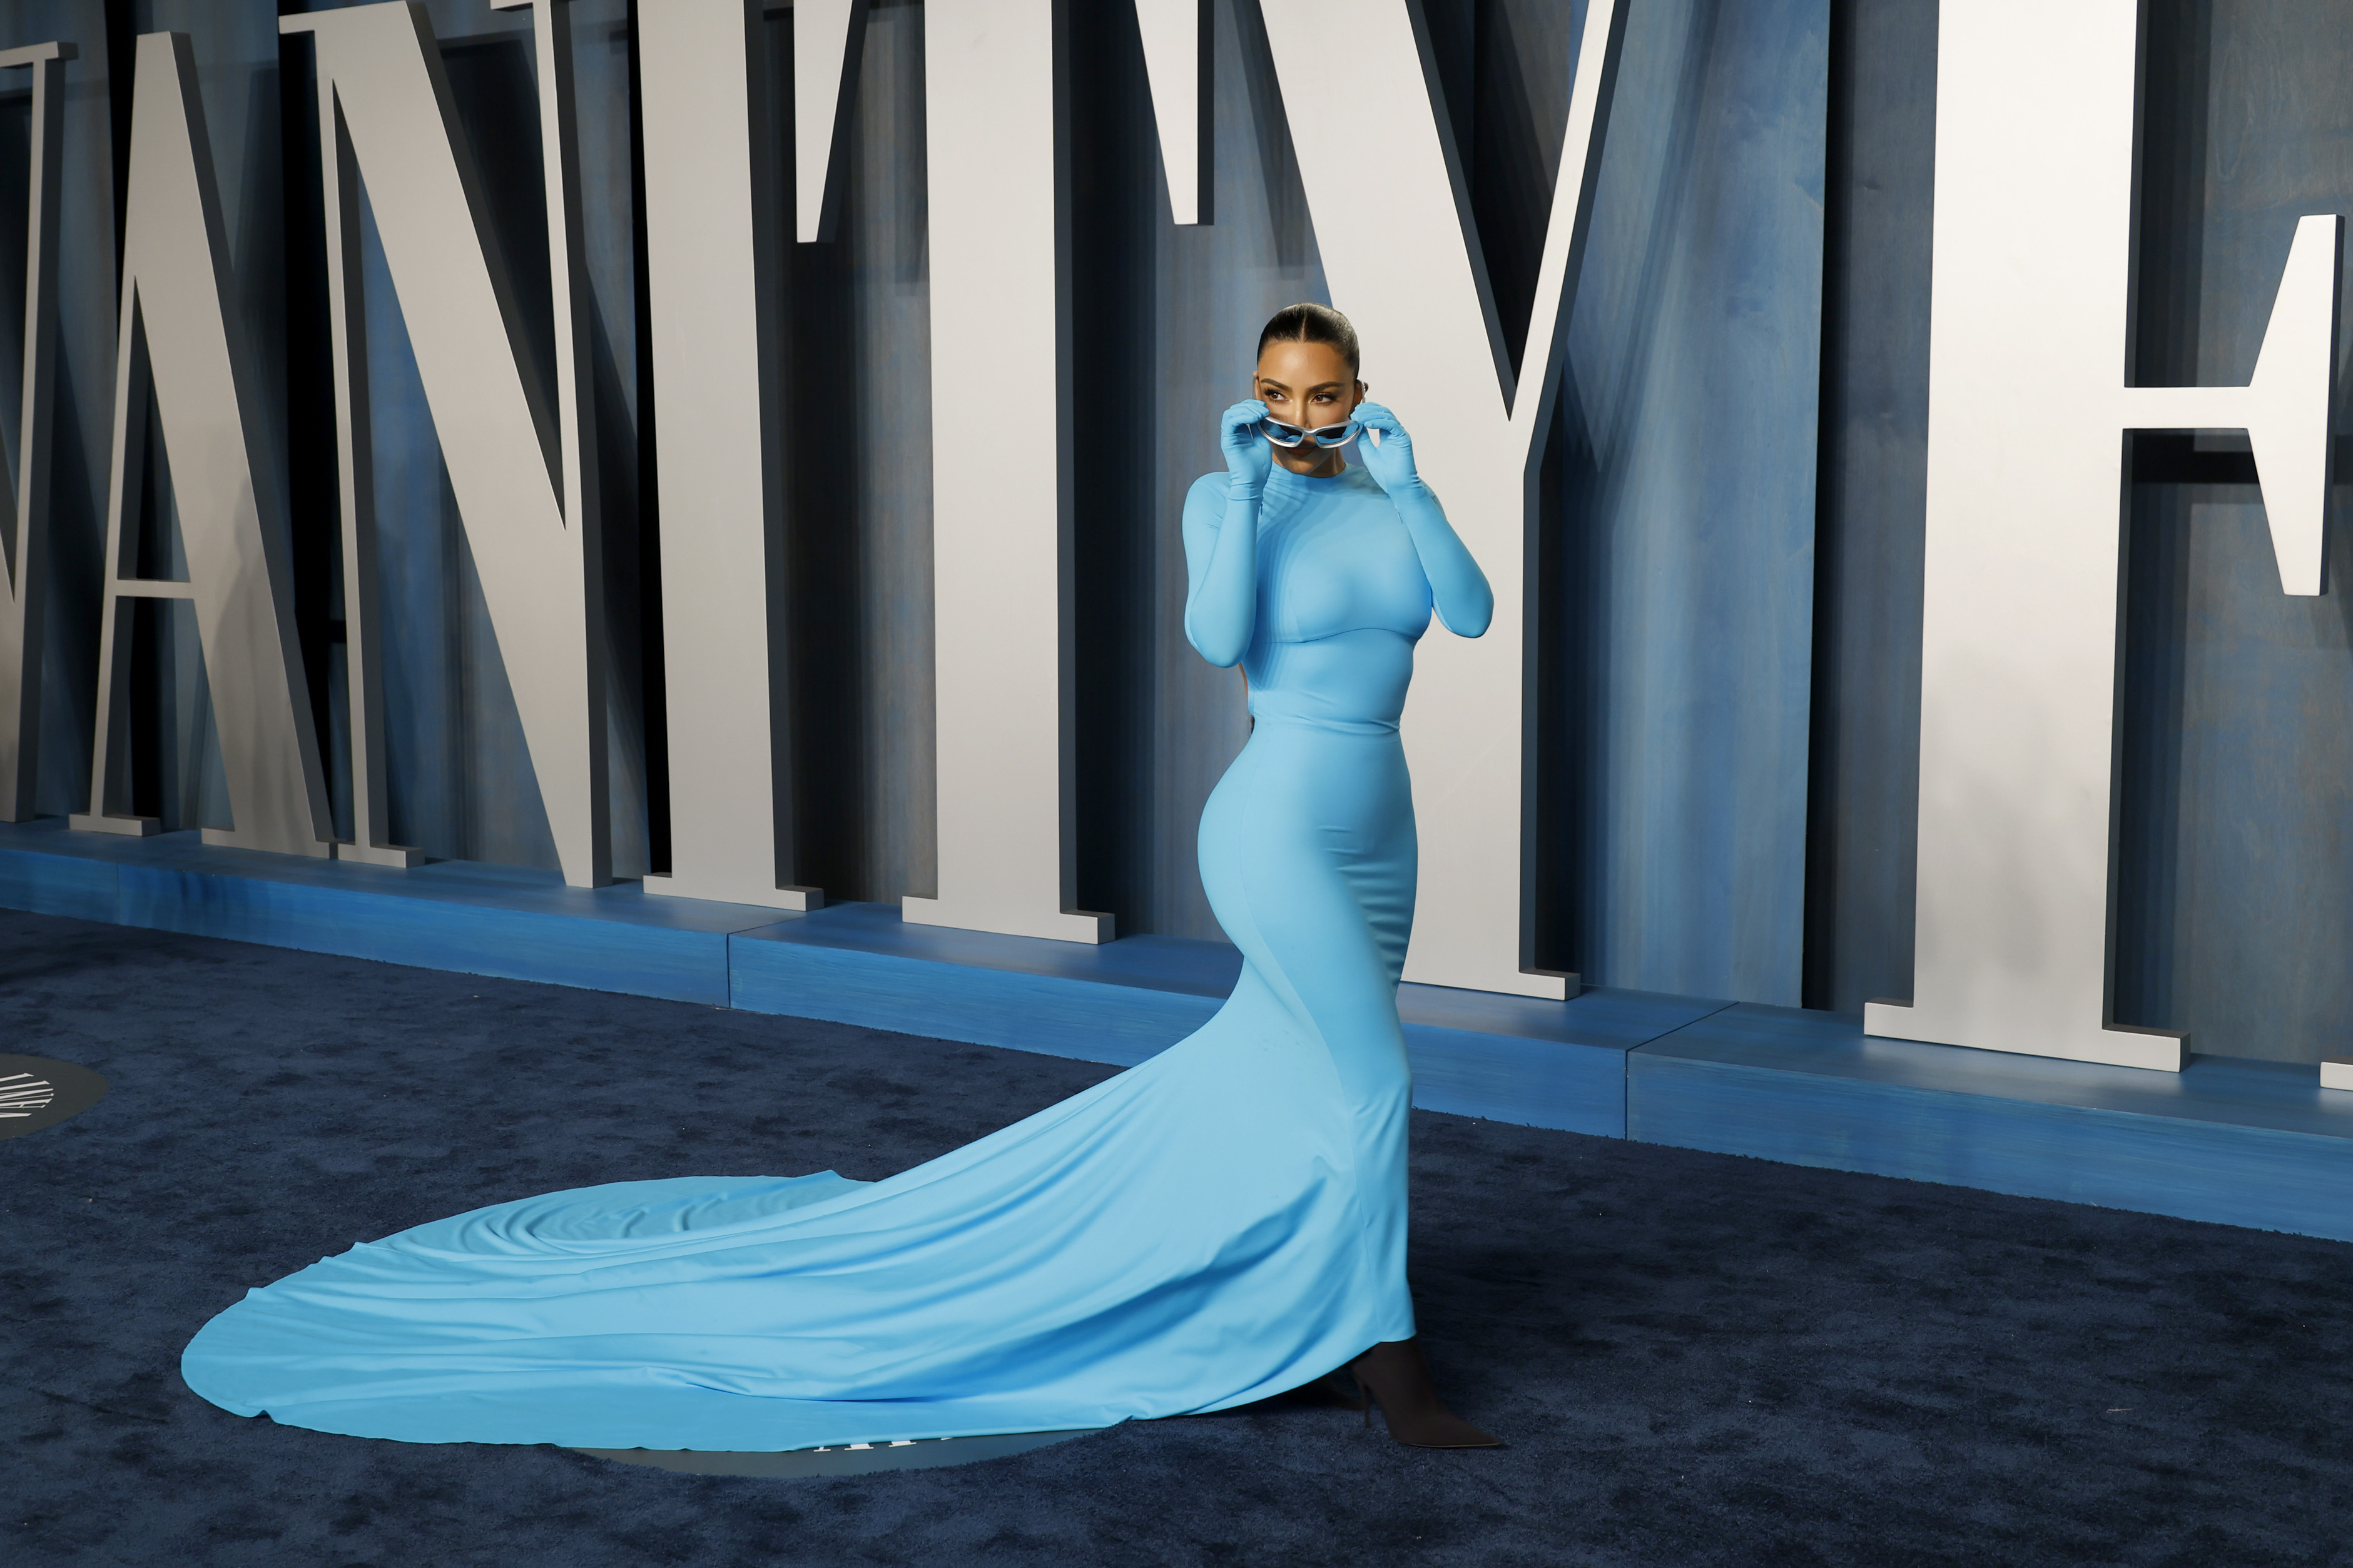 Kim Kardashian flaunts her curves in skintight blue Balenciaga gown at  Oscars afterparty  MEAWW